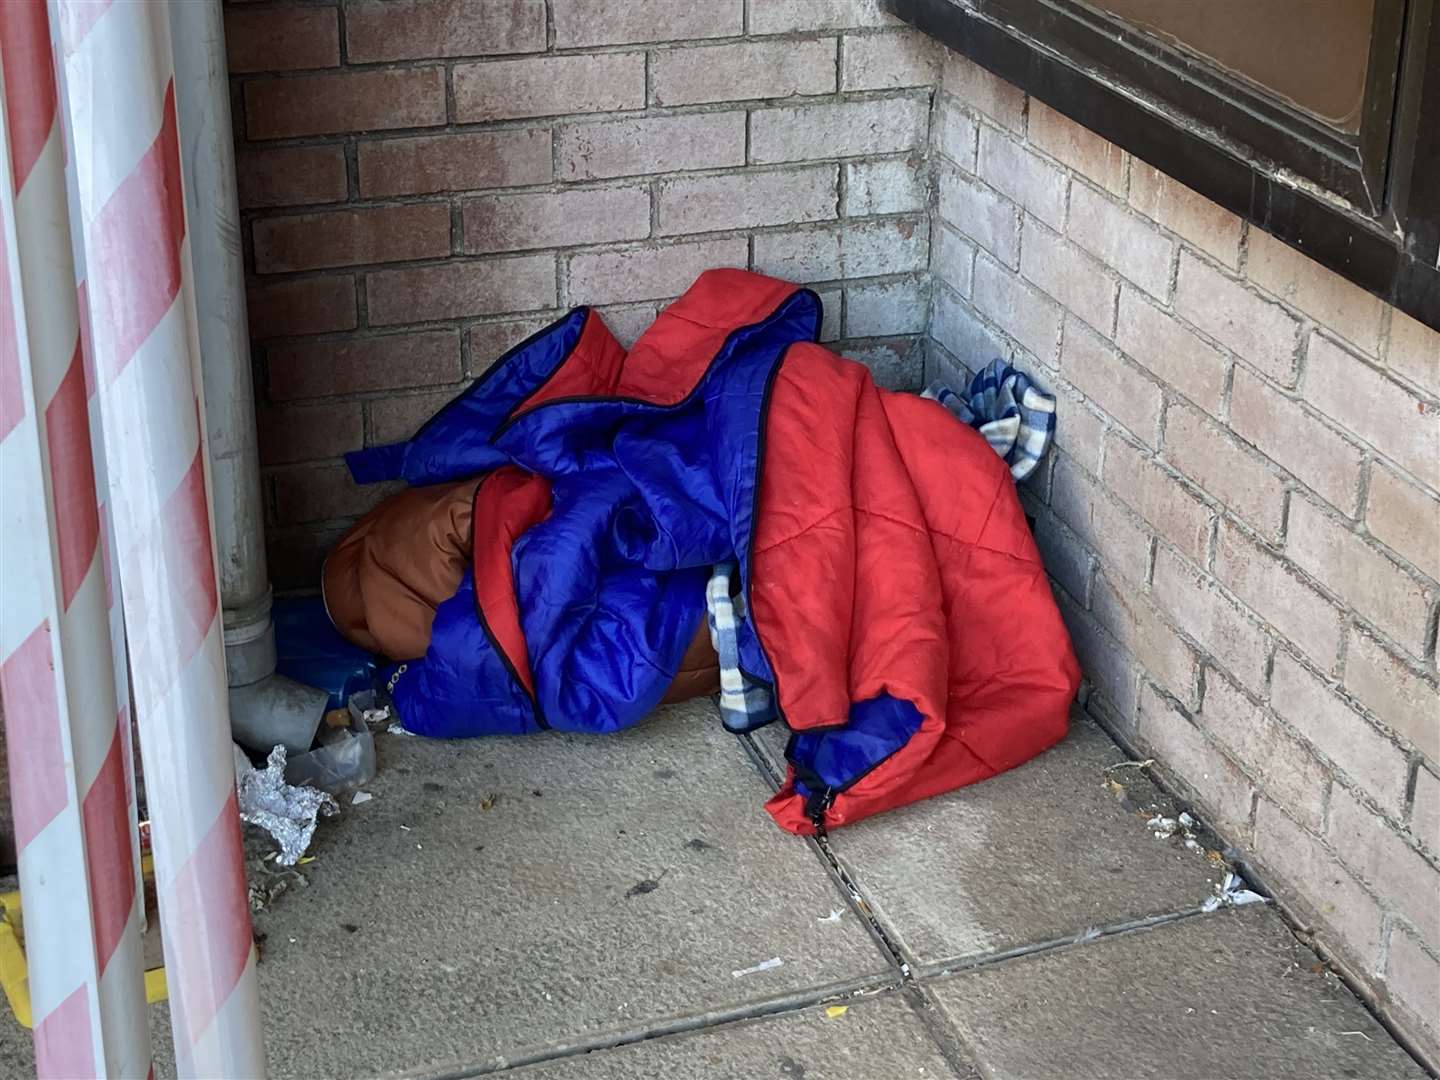 A coat and sleeping bag outside a church in Sittinbgourne. Stock picture: John Nurden